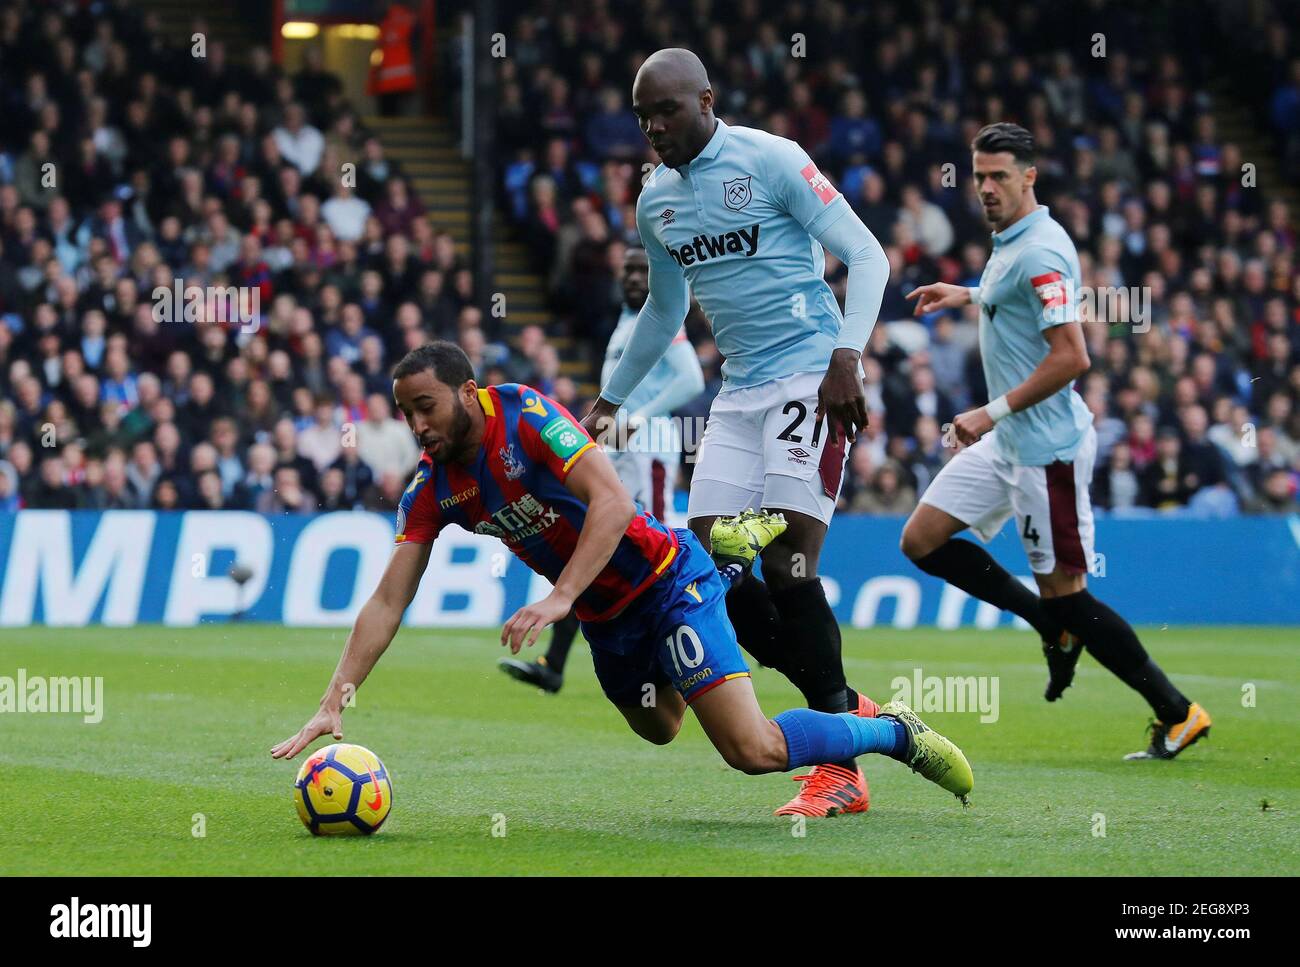 Soccer Football - Premier League - Crystal Palace vs West Ham United - Selhurst Park, London, Britain - October 28, 2017   West Ham United's Angelo Ogbonna concedes a penalty against Crystal Palace's Andros Townsend    REUTERS/Eddie Keogh    EDITORIAL USE ONLY. No use with unauthorized audio, video, data, fixture lists, club/league logos or 'live' services. Online in-match use limited to 75 images, no video emulation. No use in betting, games or single club/league/player publications. Please contact your account representative for further details.? Stock Photo